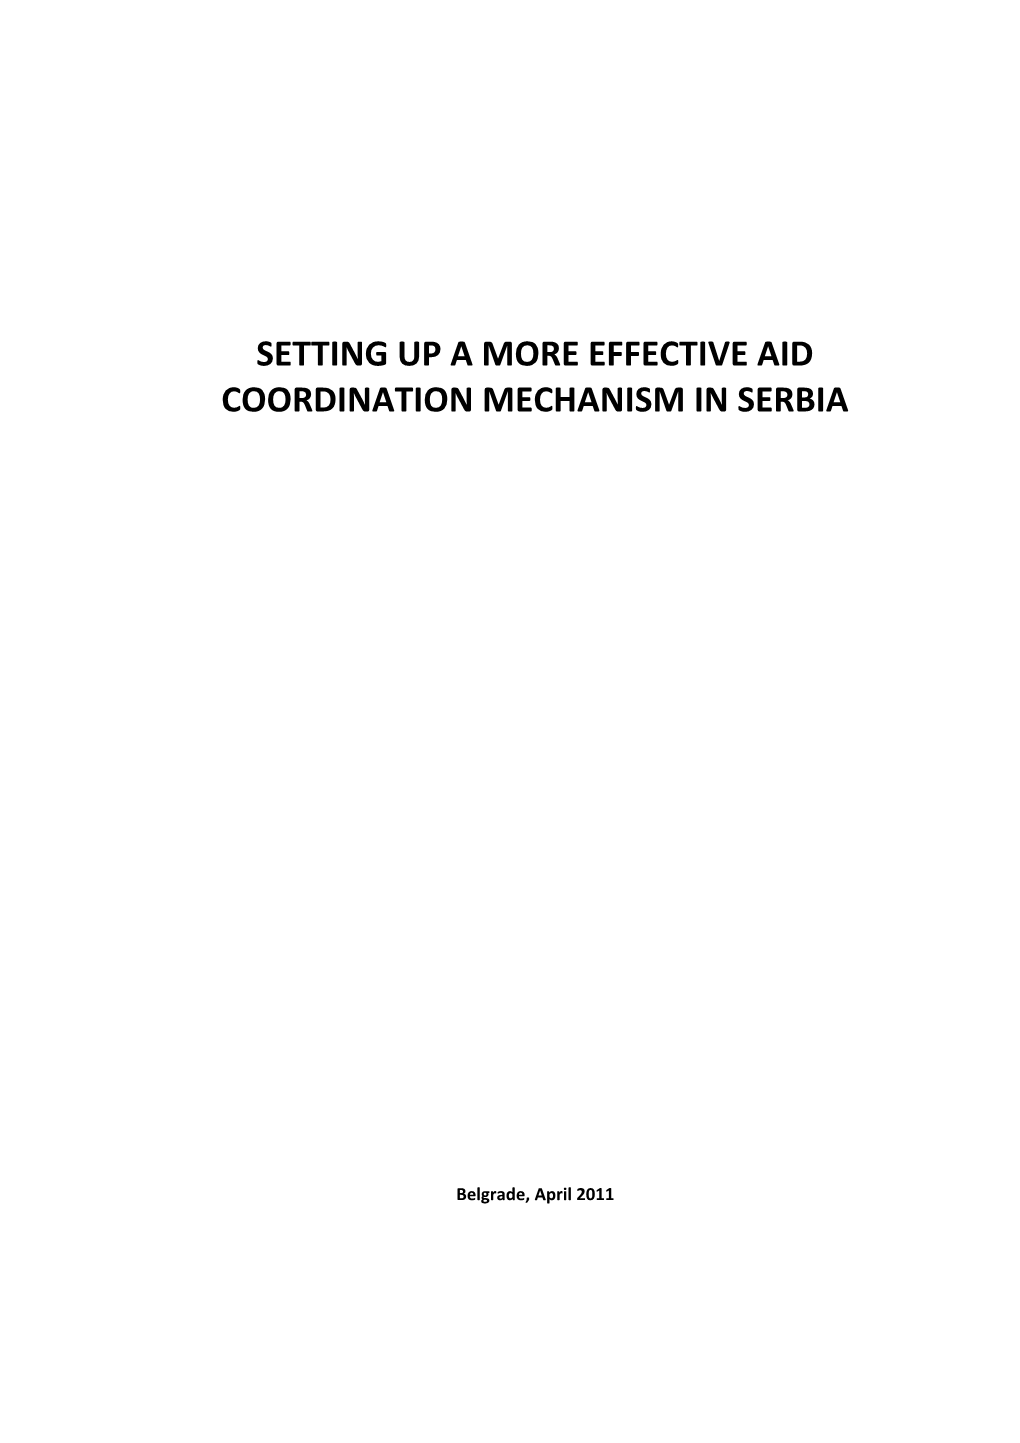 Setting up a More Effective Aid Coordination Mechanism in Serbia